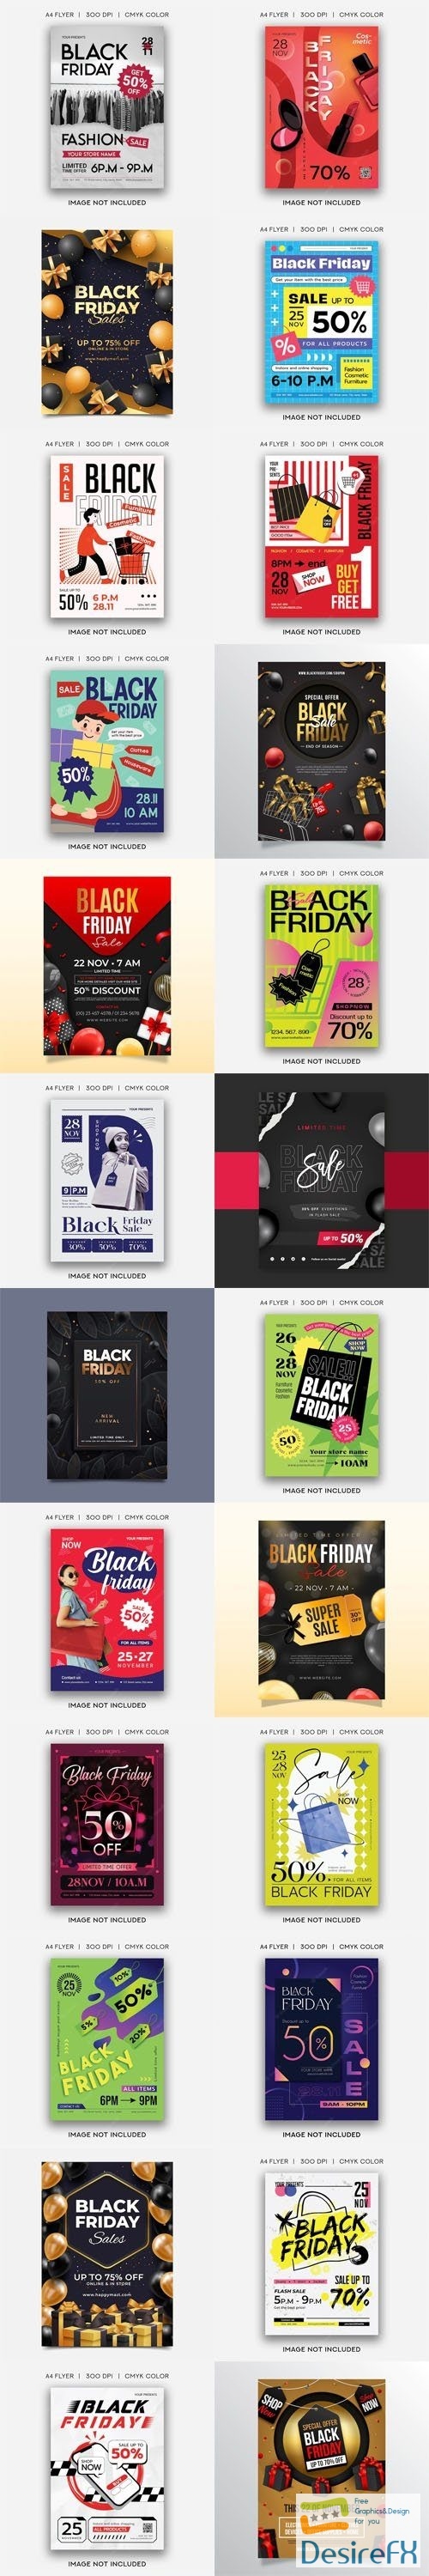 Black Friday - 20+ Flyers Vector Templates Collection